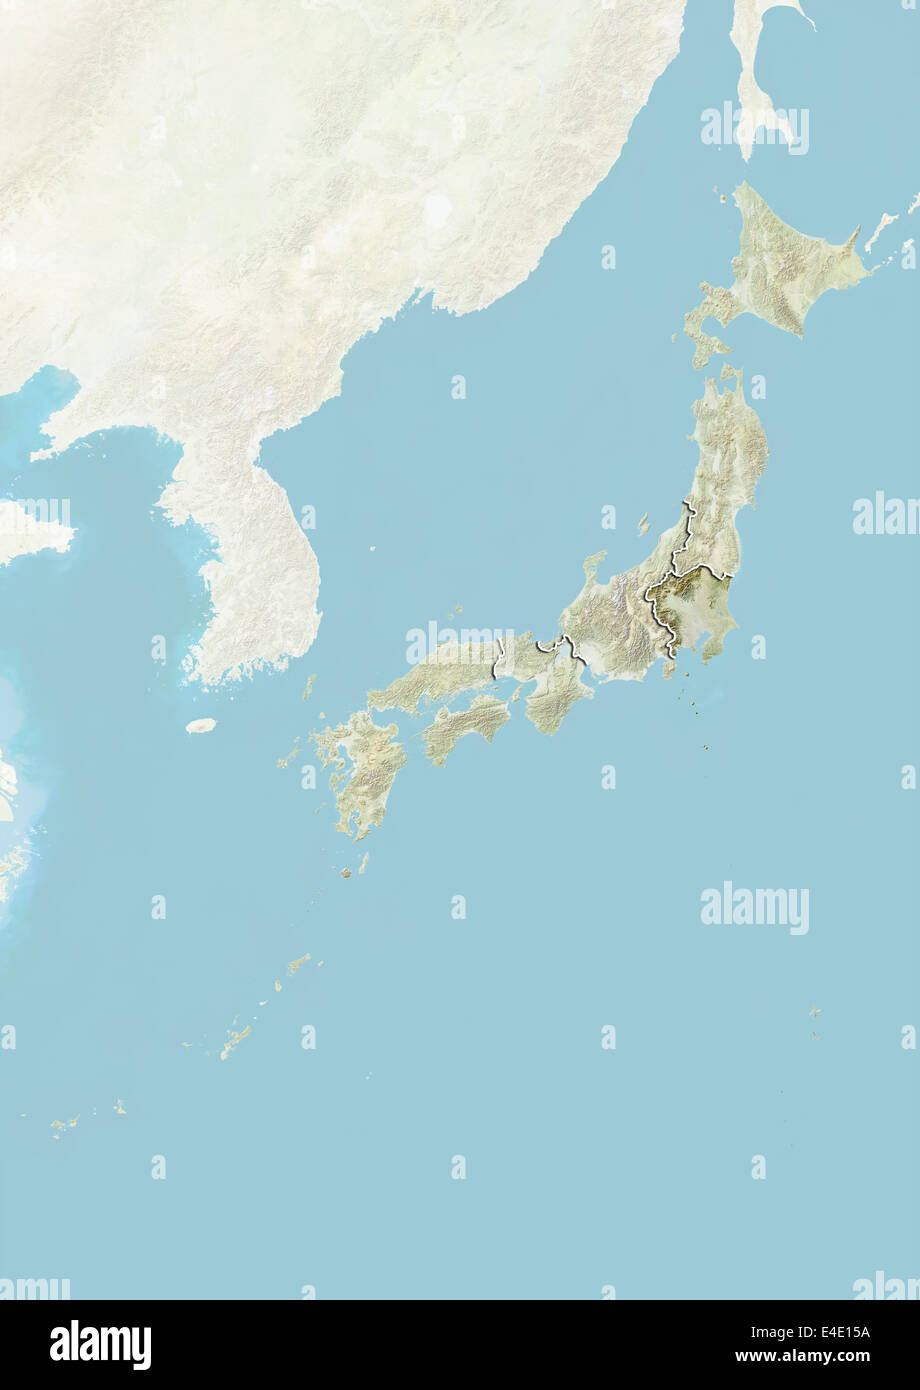 Japan and the Region of Kanto, Relief Map Stock Photo